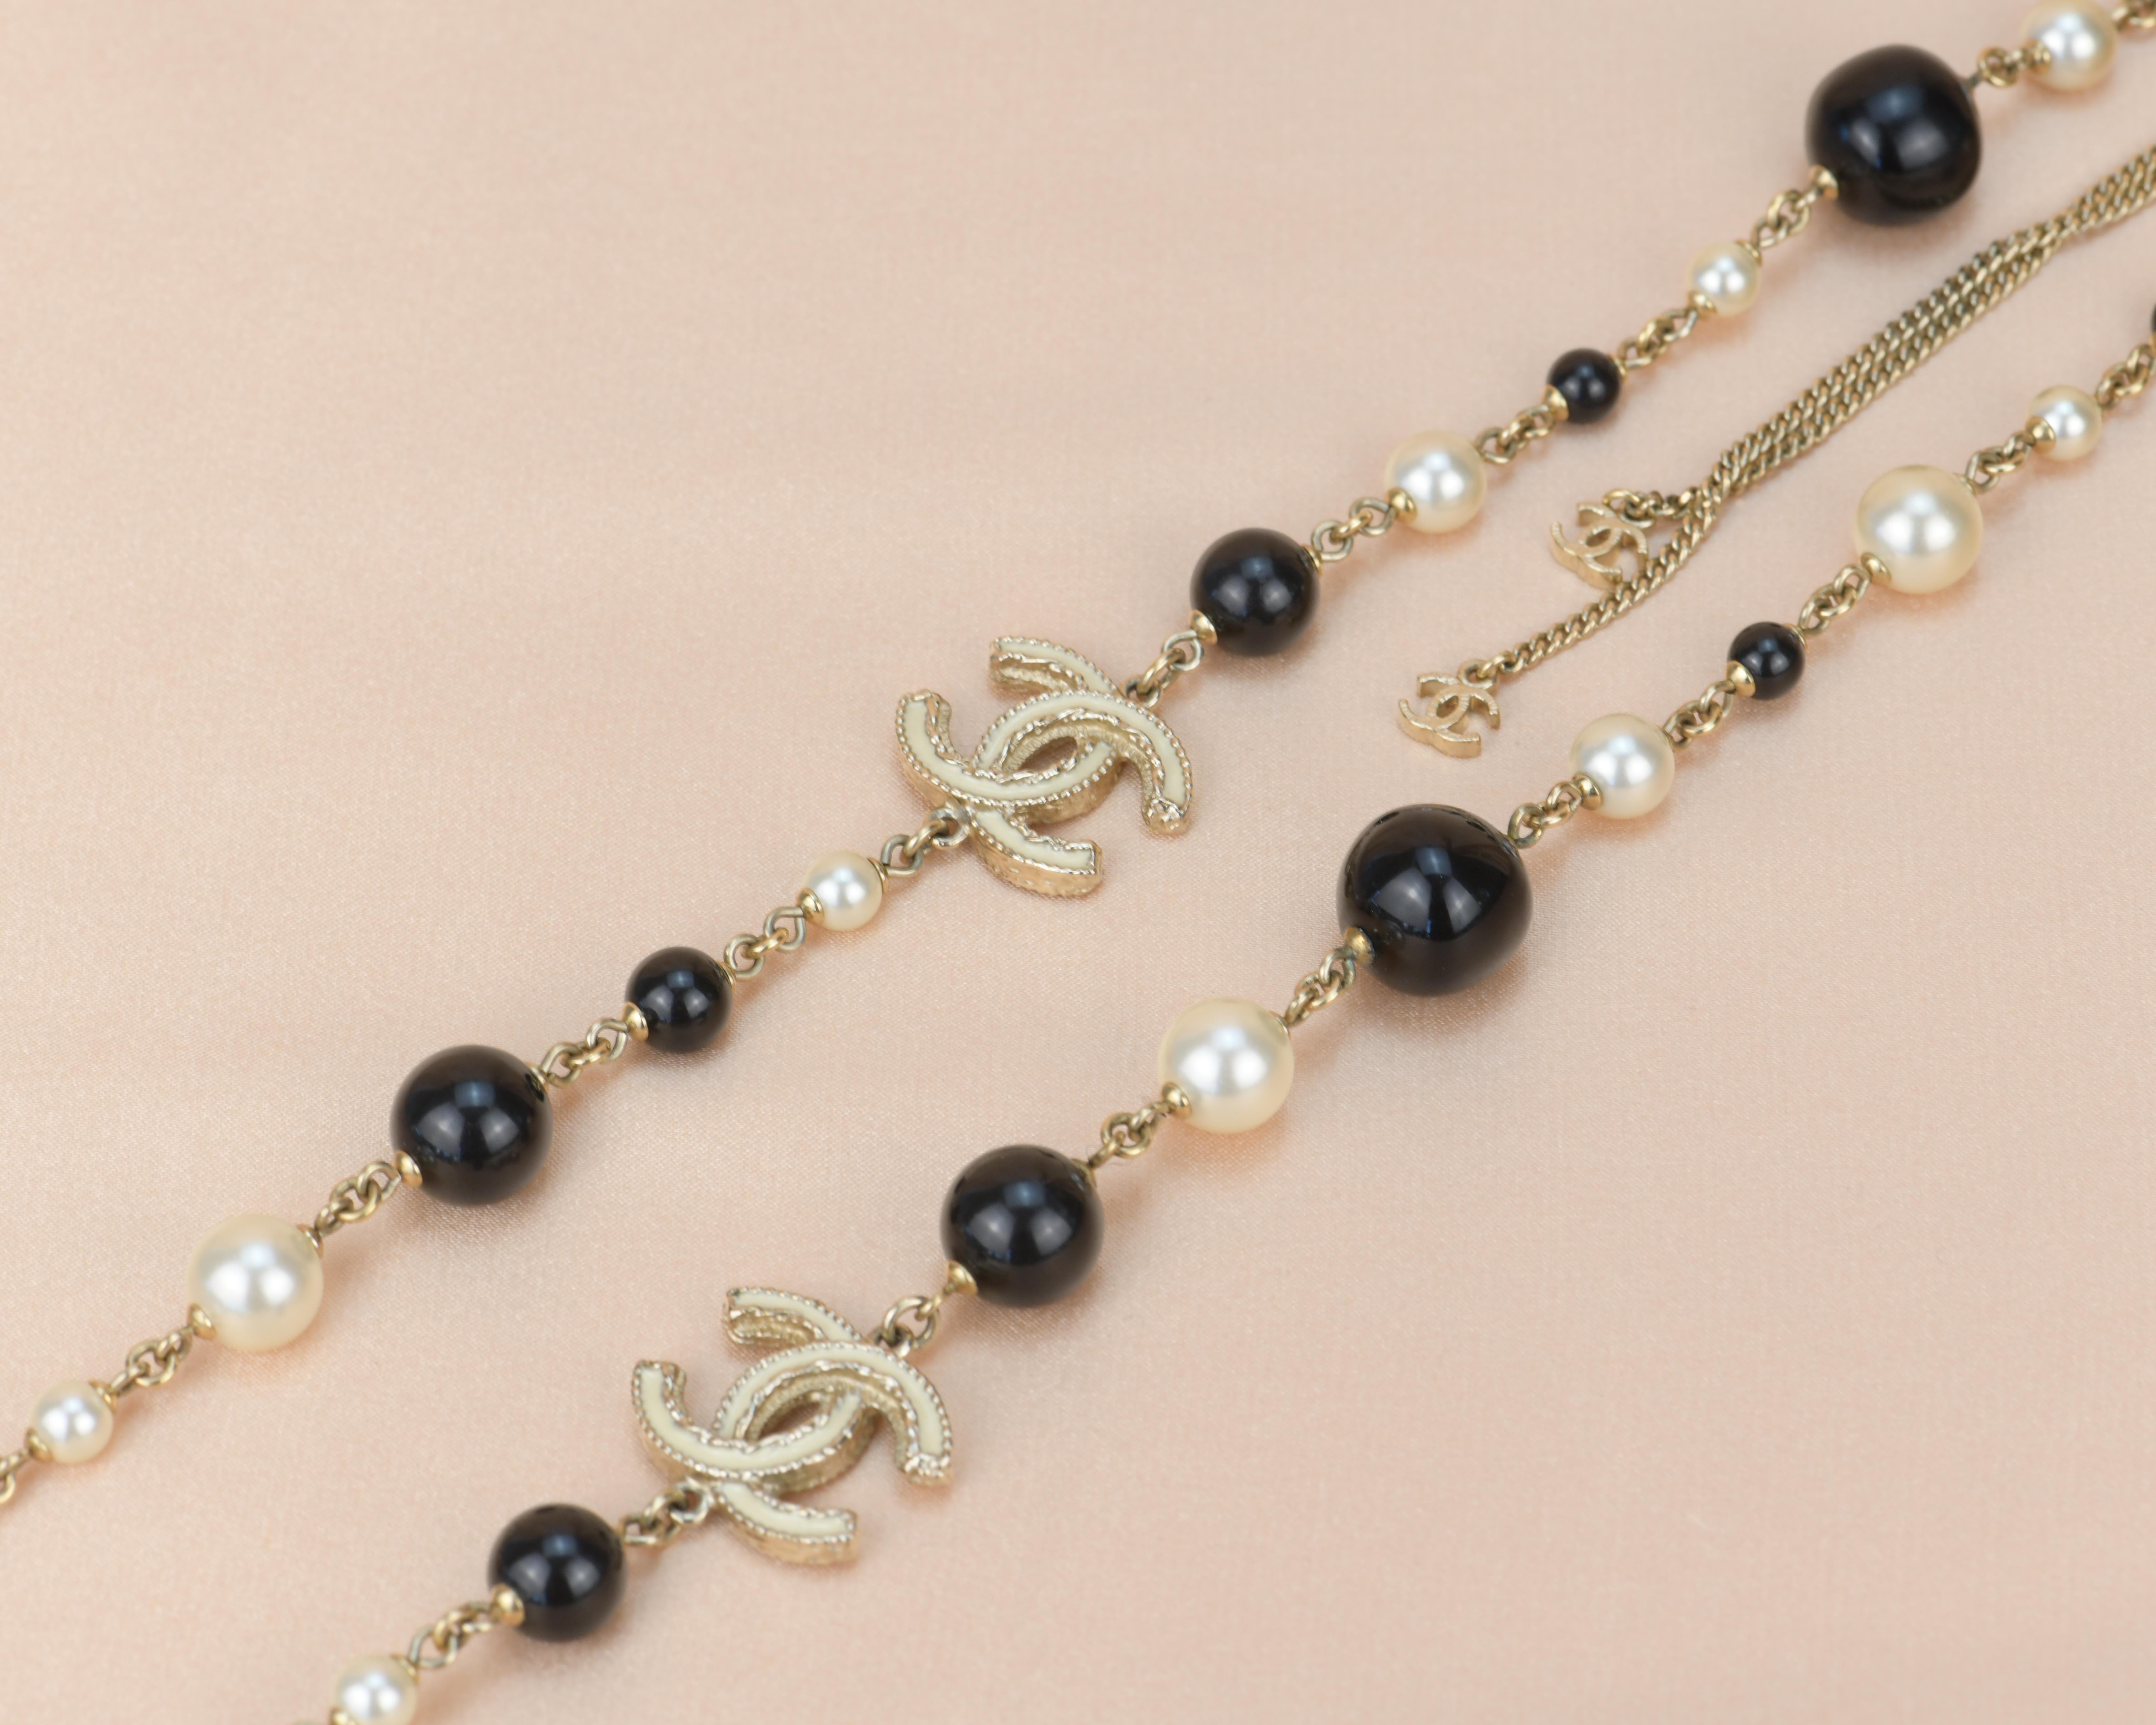 Bead Chanel CC 2011 Pearl Necklace and Earrings Set